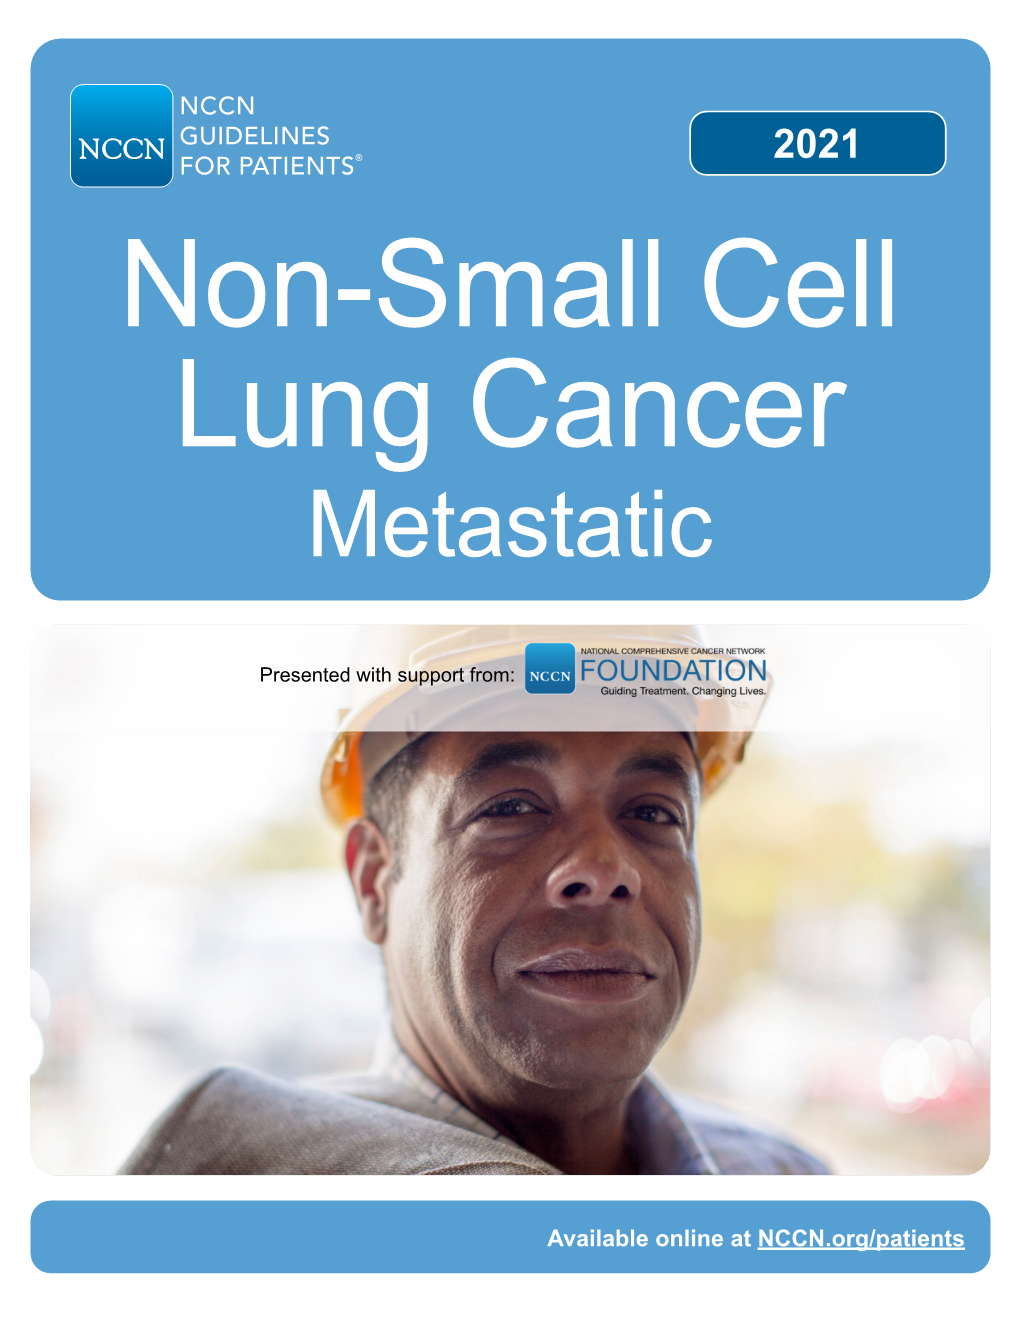 Metastatic Non-Small Cell Lung Cancer